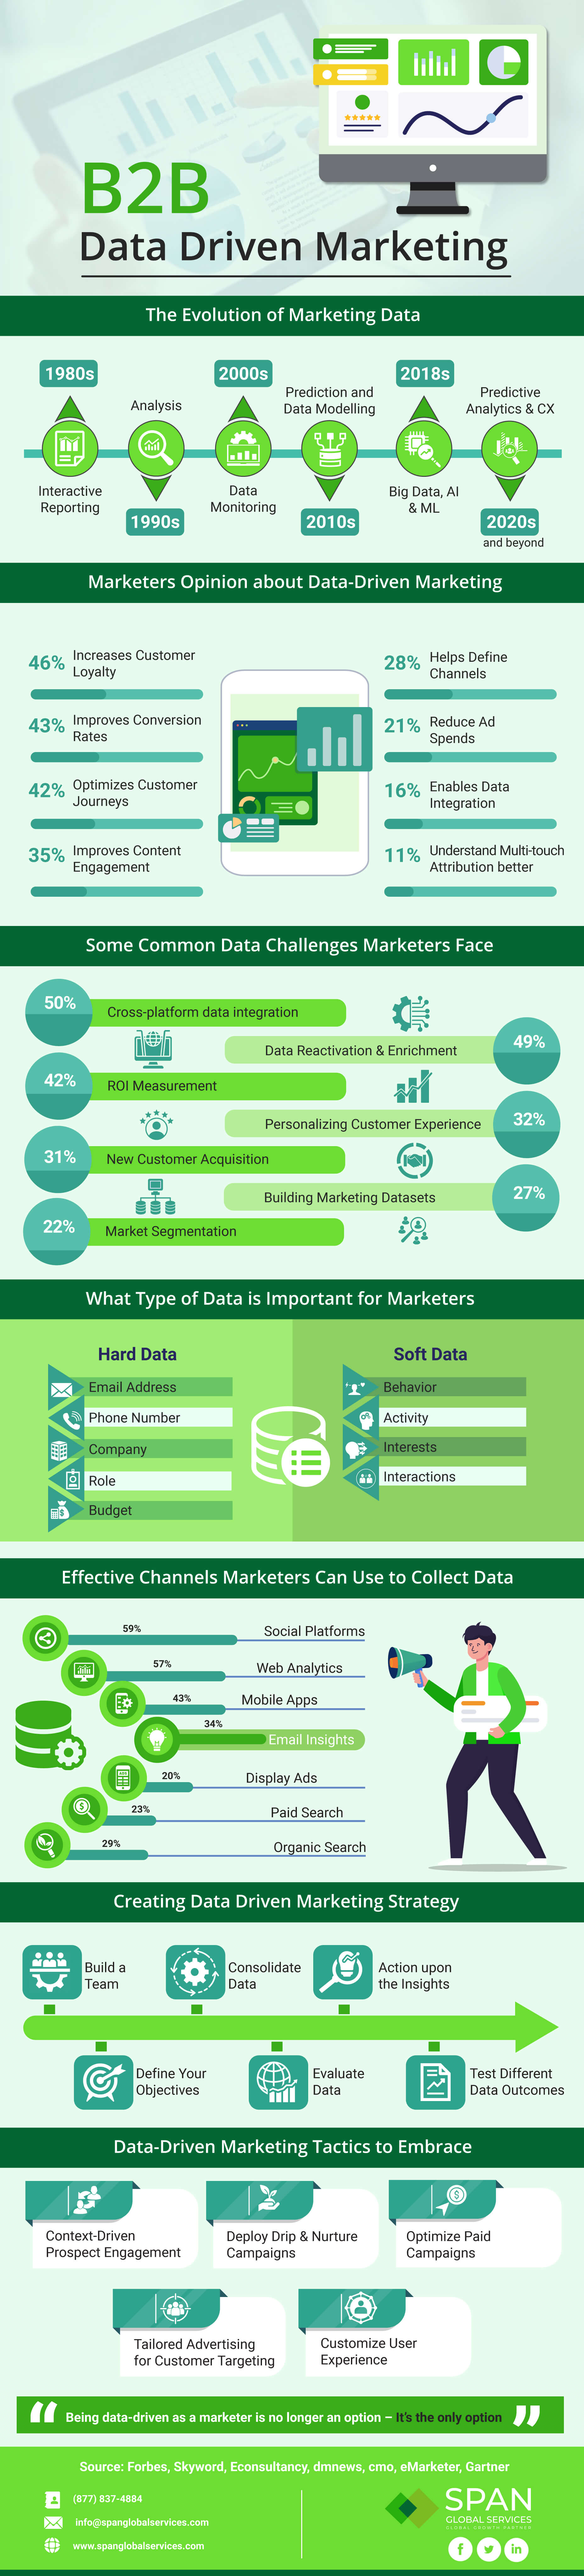 Span Global Services infographic on the evolution of data in B2B marketing